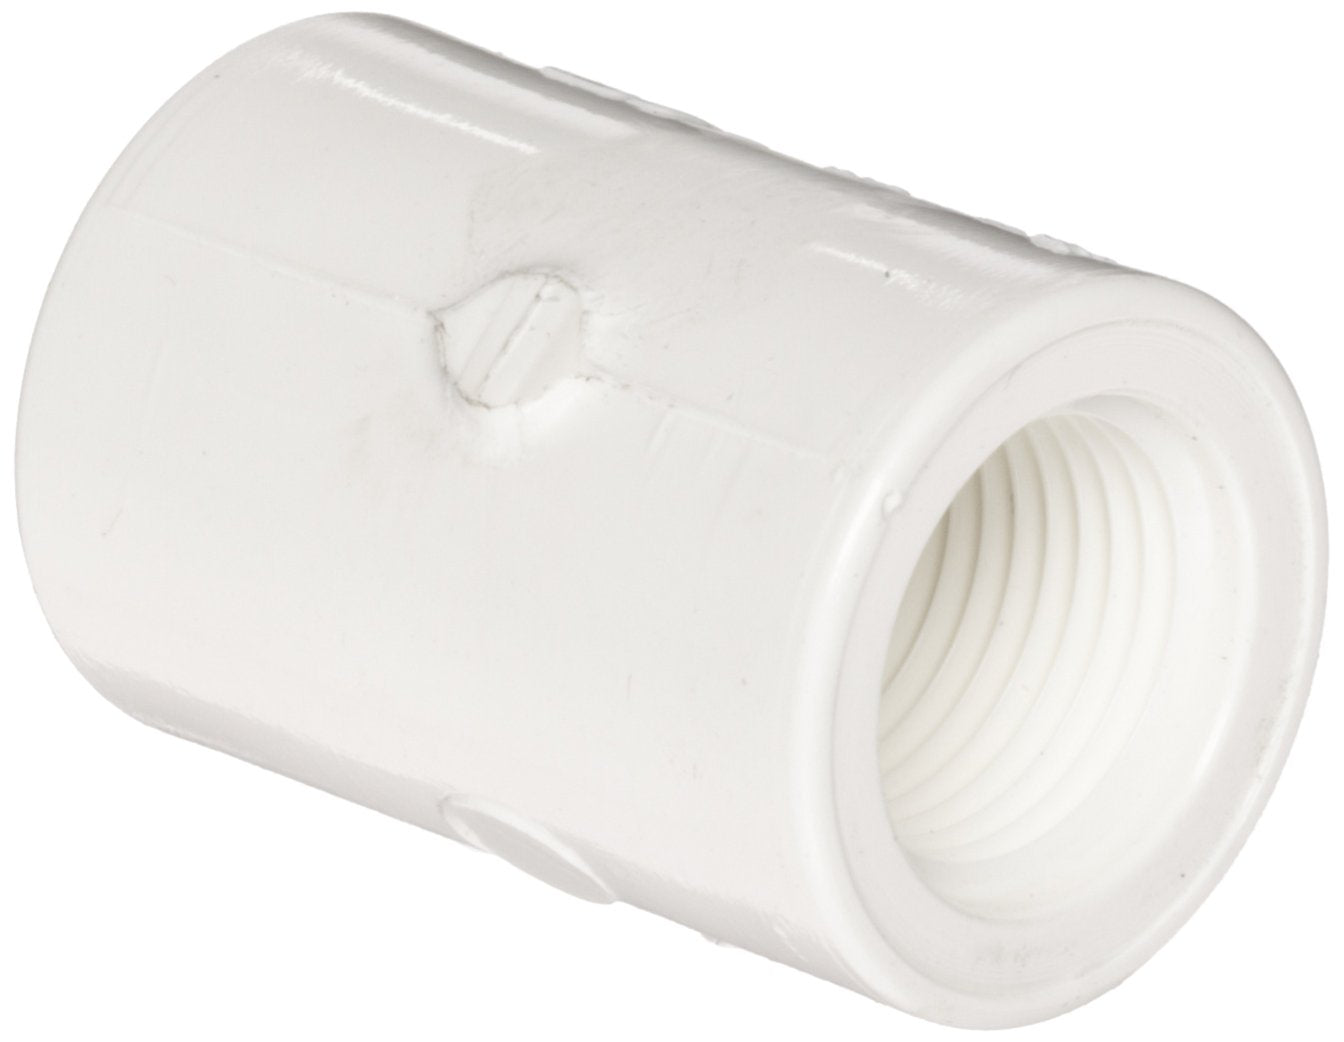 435-101 - 3/4" Socket x 1/2"  PVC Pipe Fitting, Adapter, Schedule 40, White, NPT Female